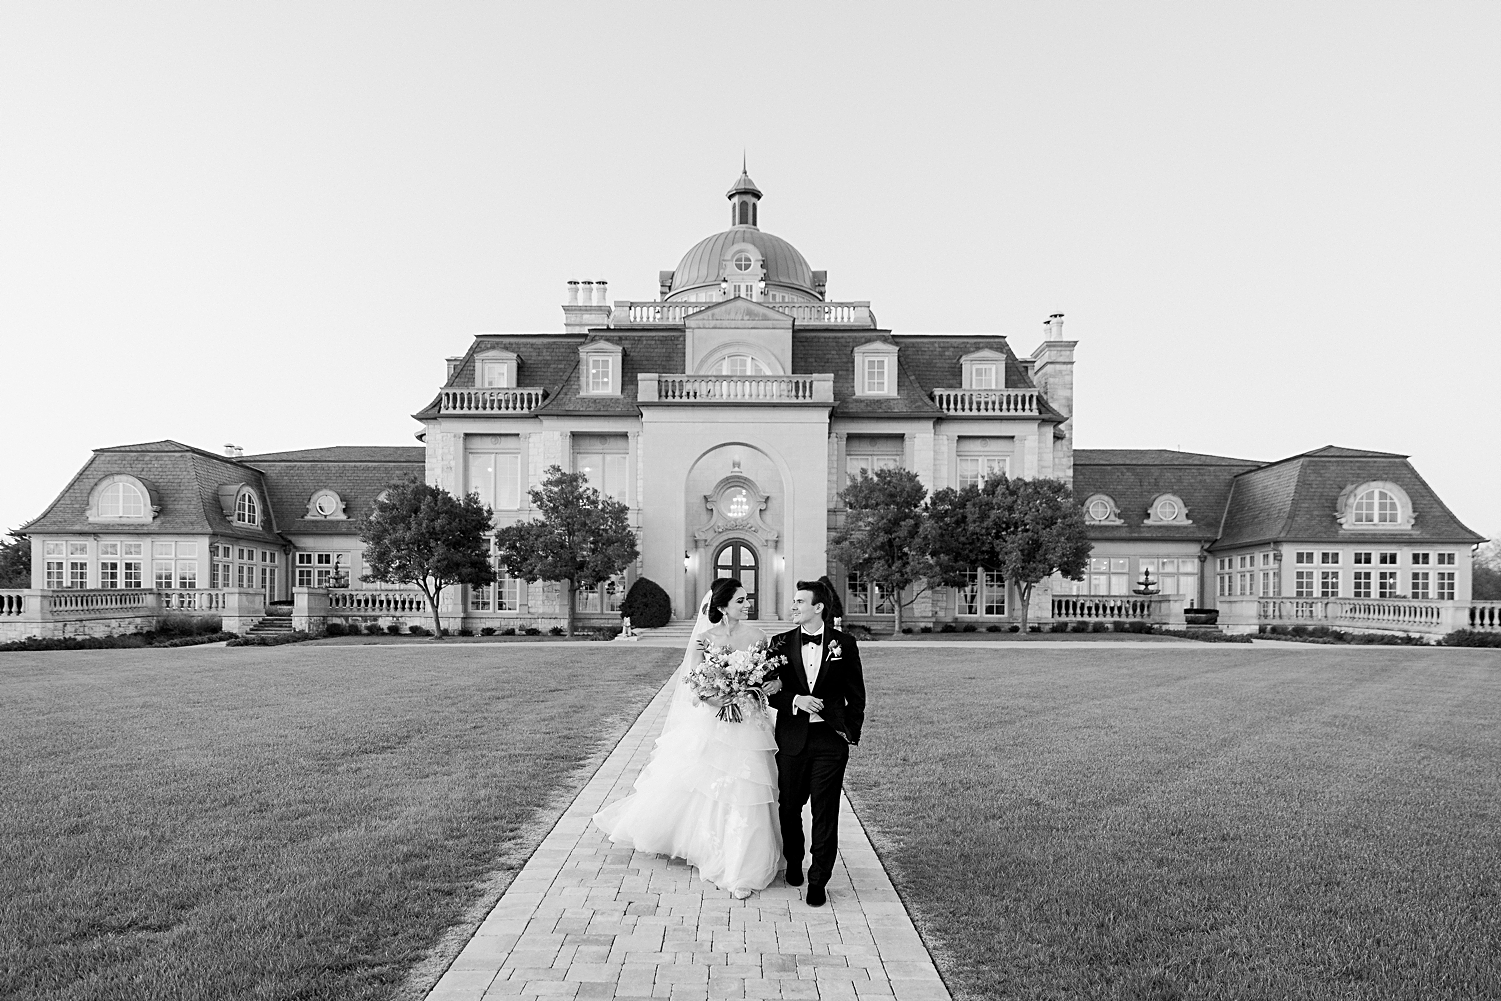 Bride and groom walking in front of mansion at french estate wedding at sunset black and white